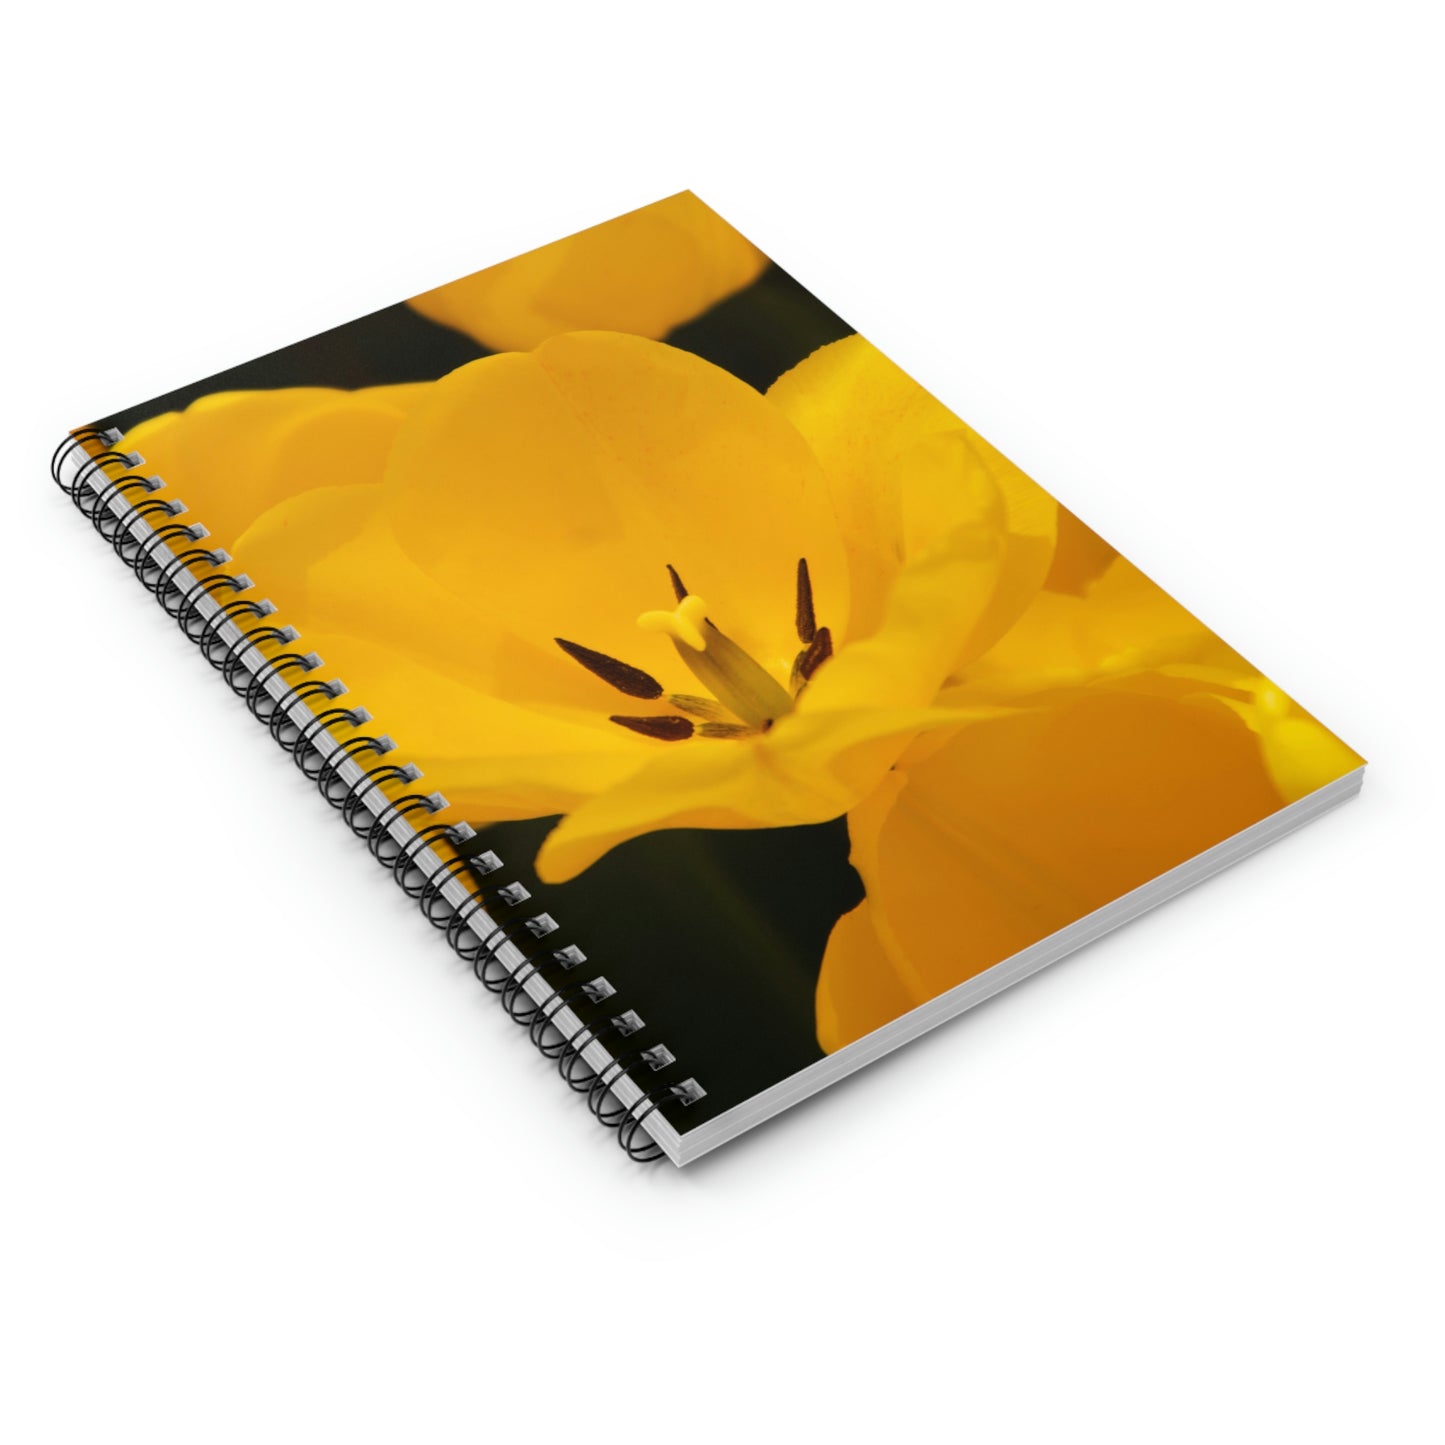 Flowers 16 Spiral Notebook - Ruled Line